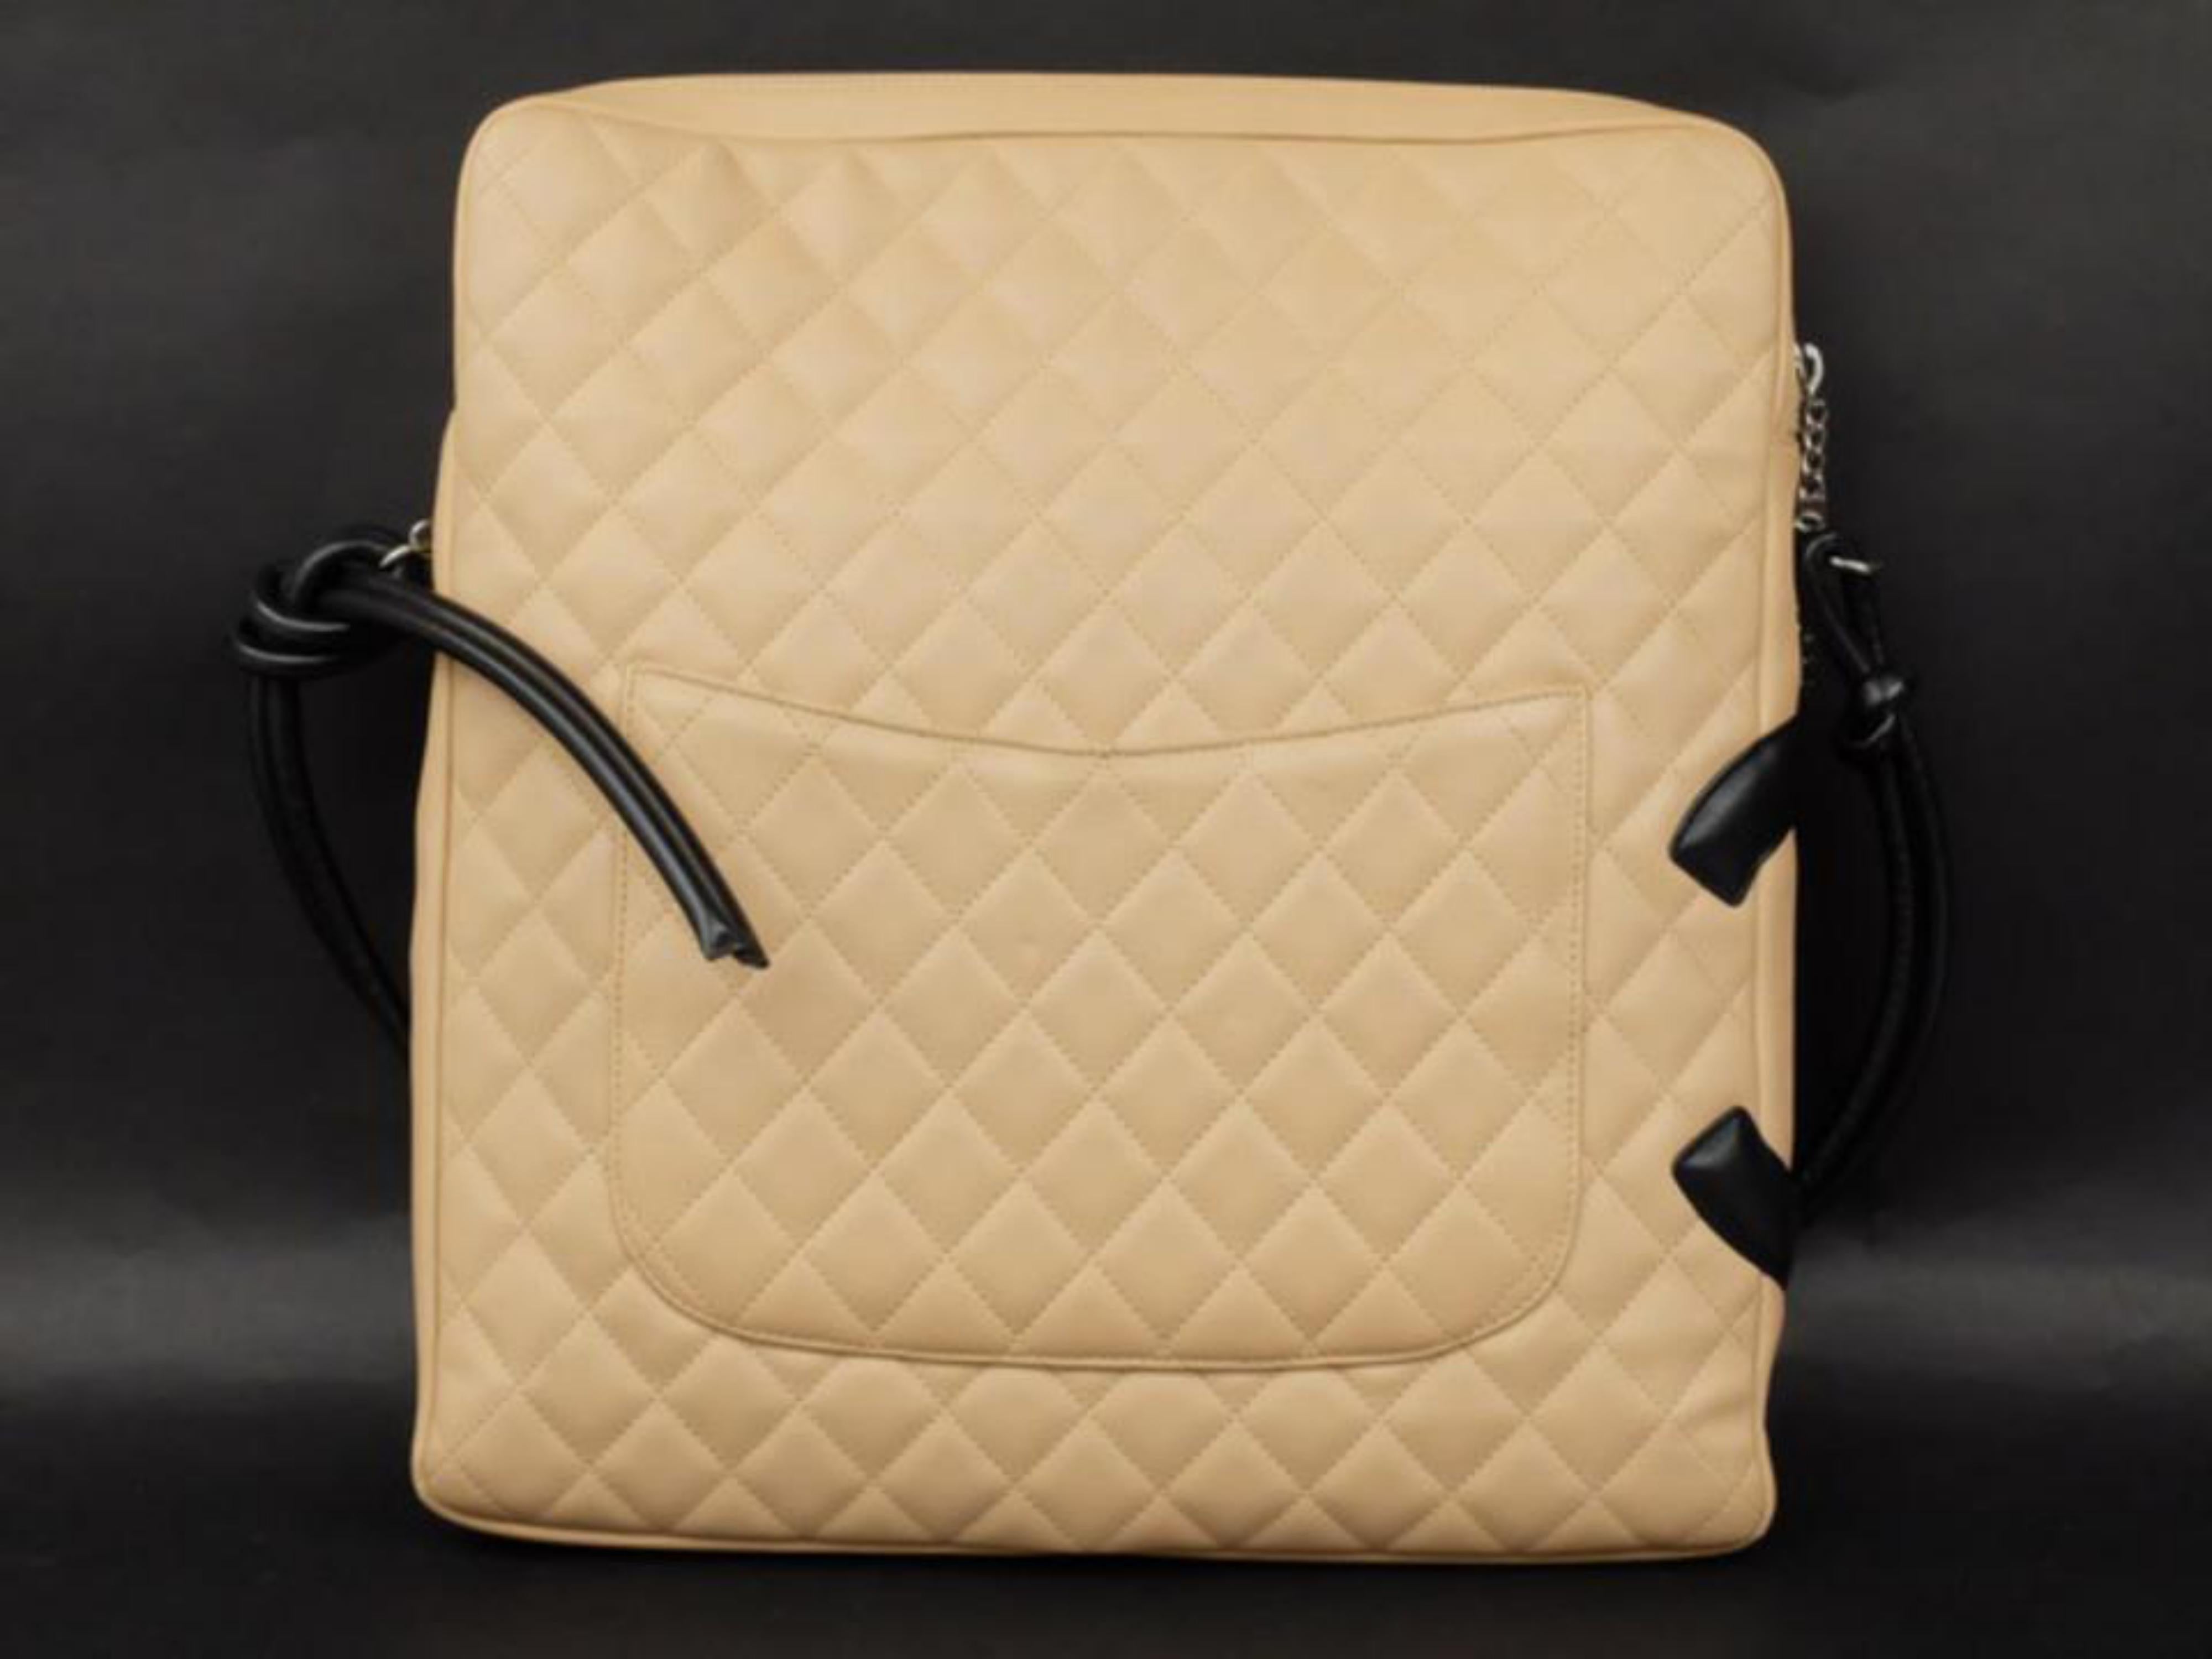 Women's Chanel Messenger Cambon Extra 227178 Beige Quilted Leather Cross Body Bag For Sale